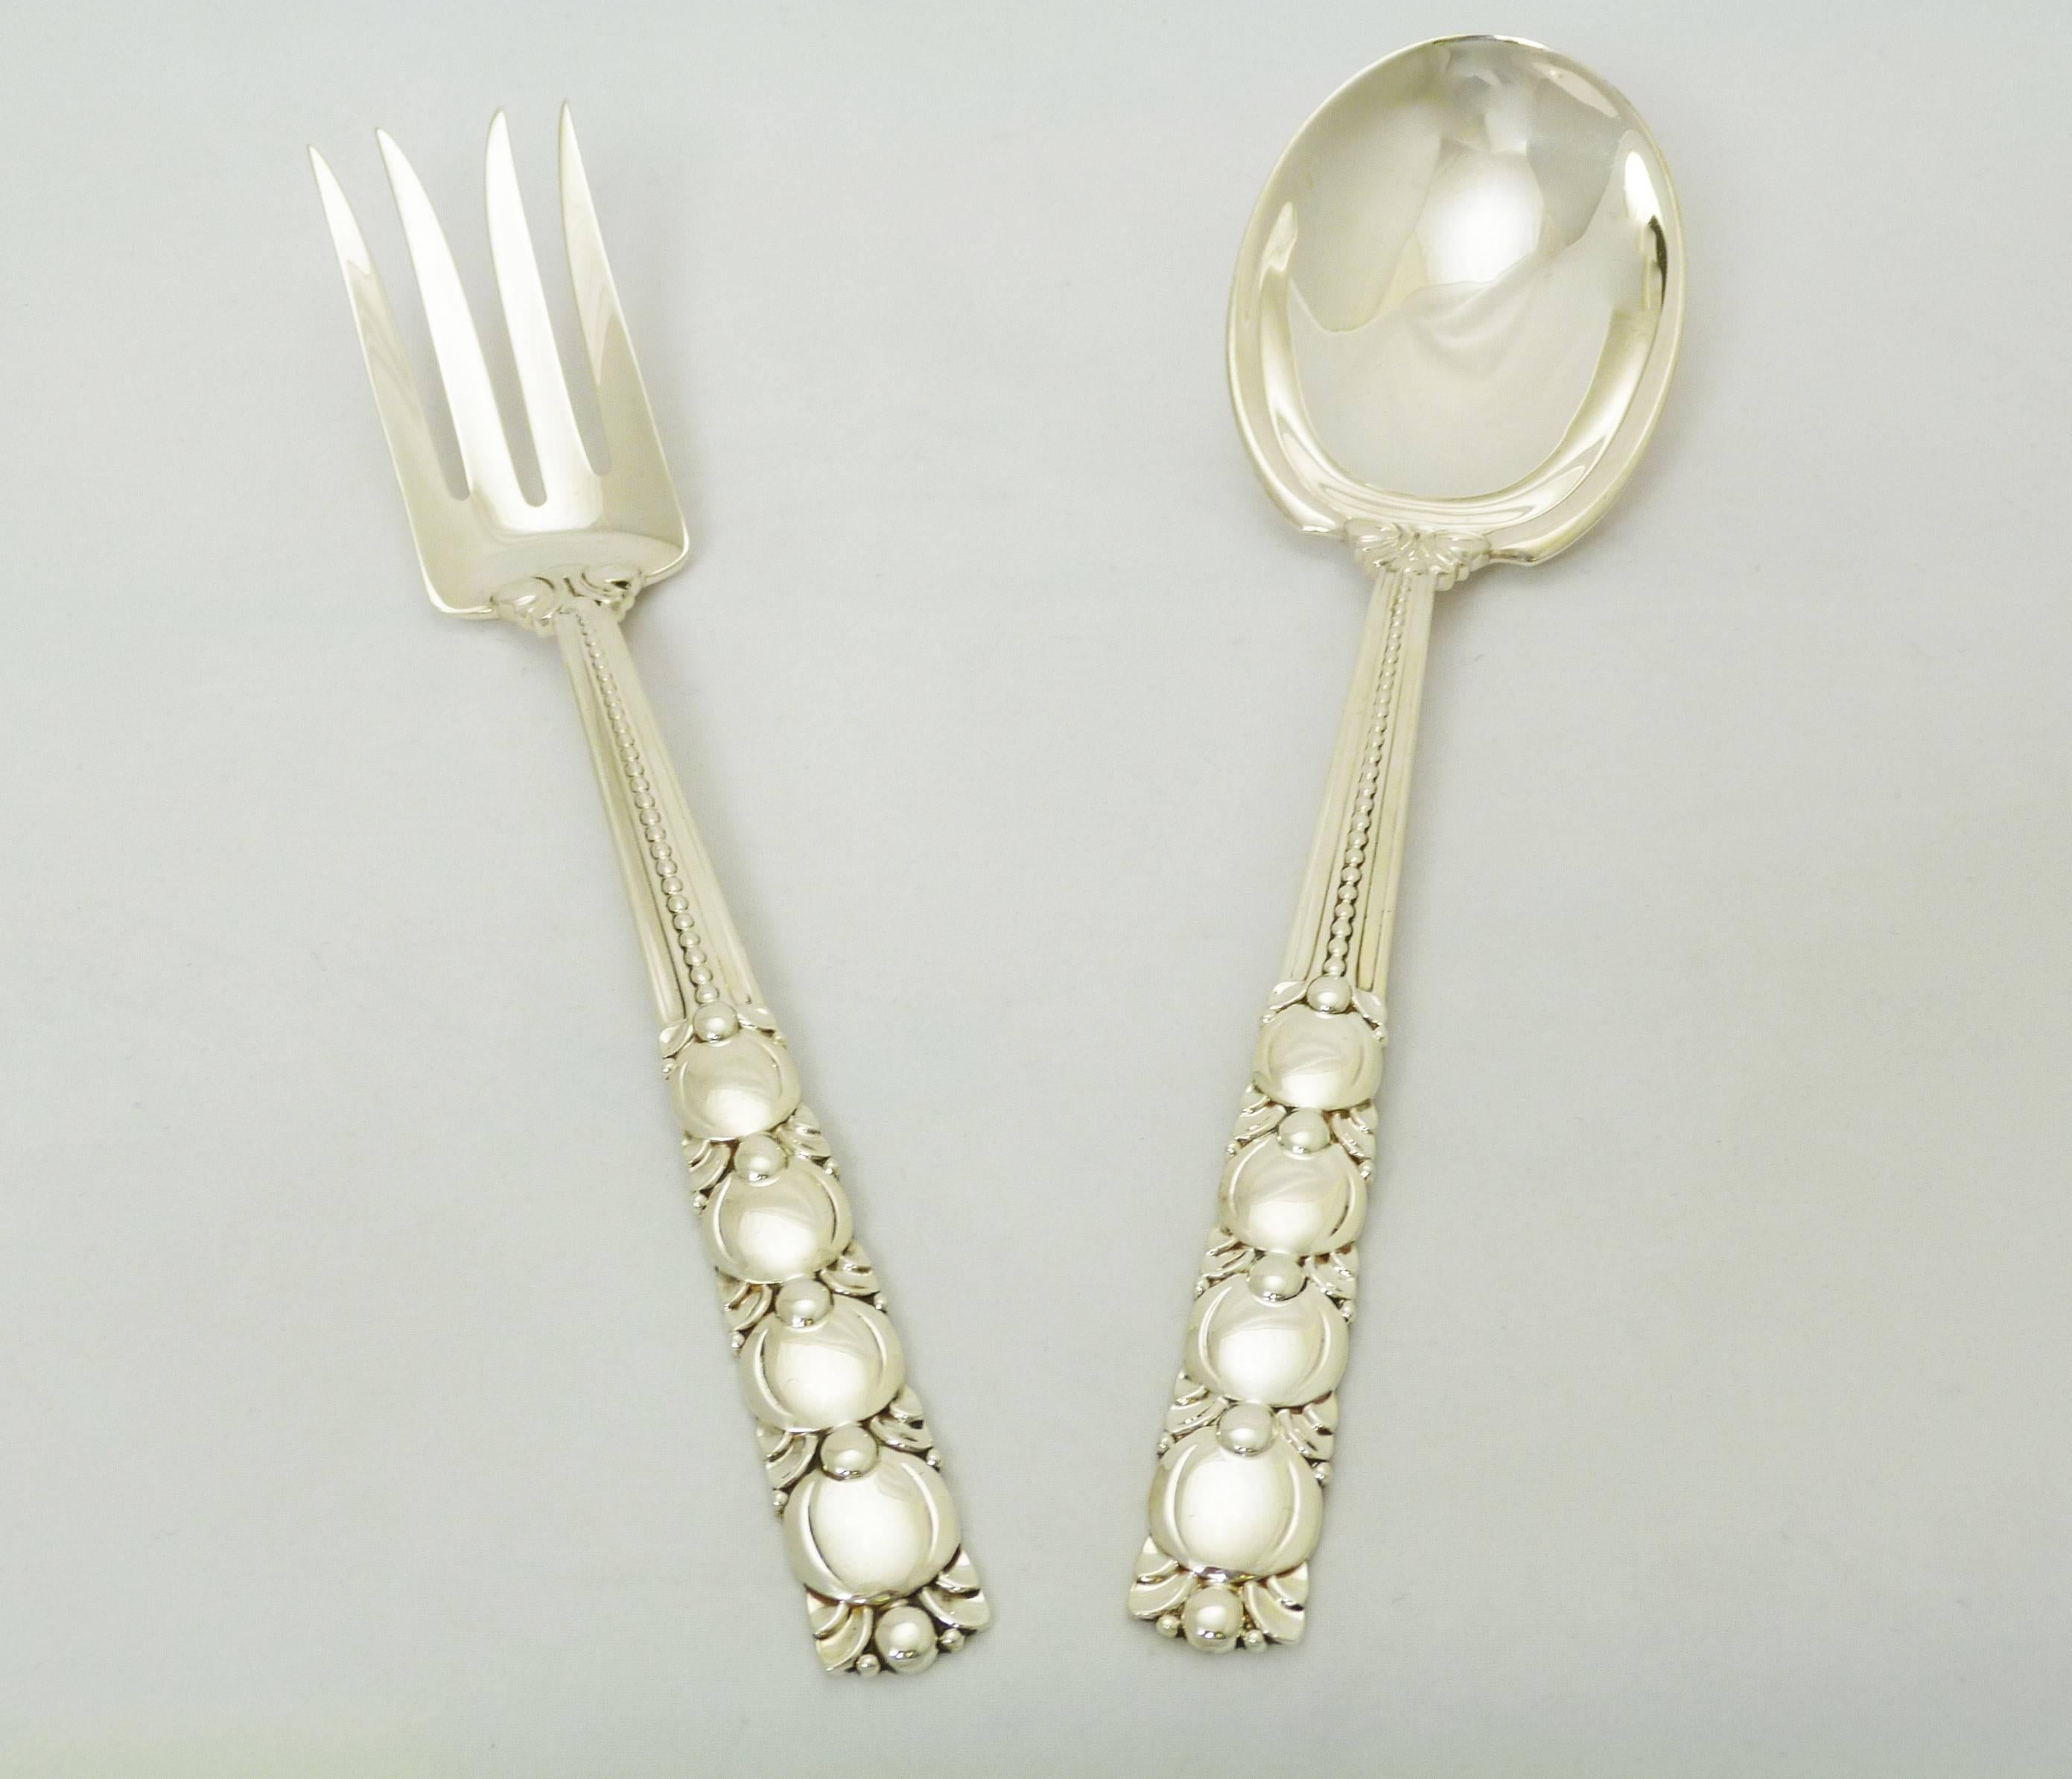 Tiffany & Co. Sterling Silver Bowl, Underplate and Salad Serving Set In Excellent Condition For Sale In New York, NY